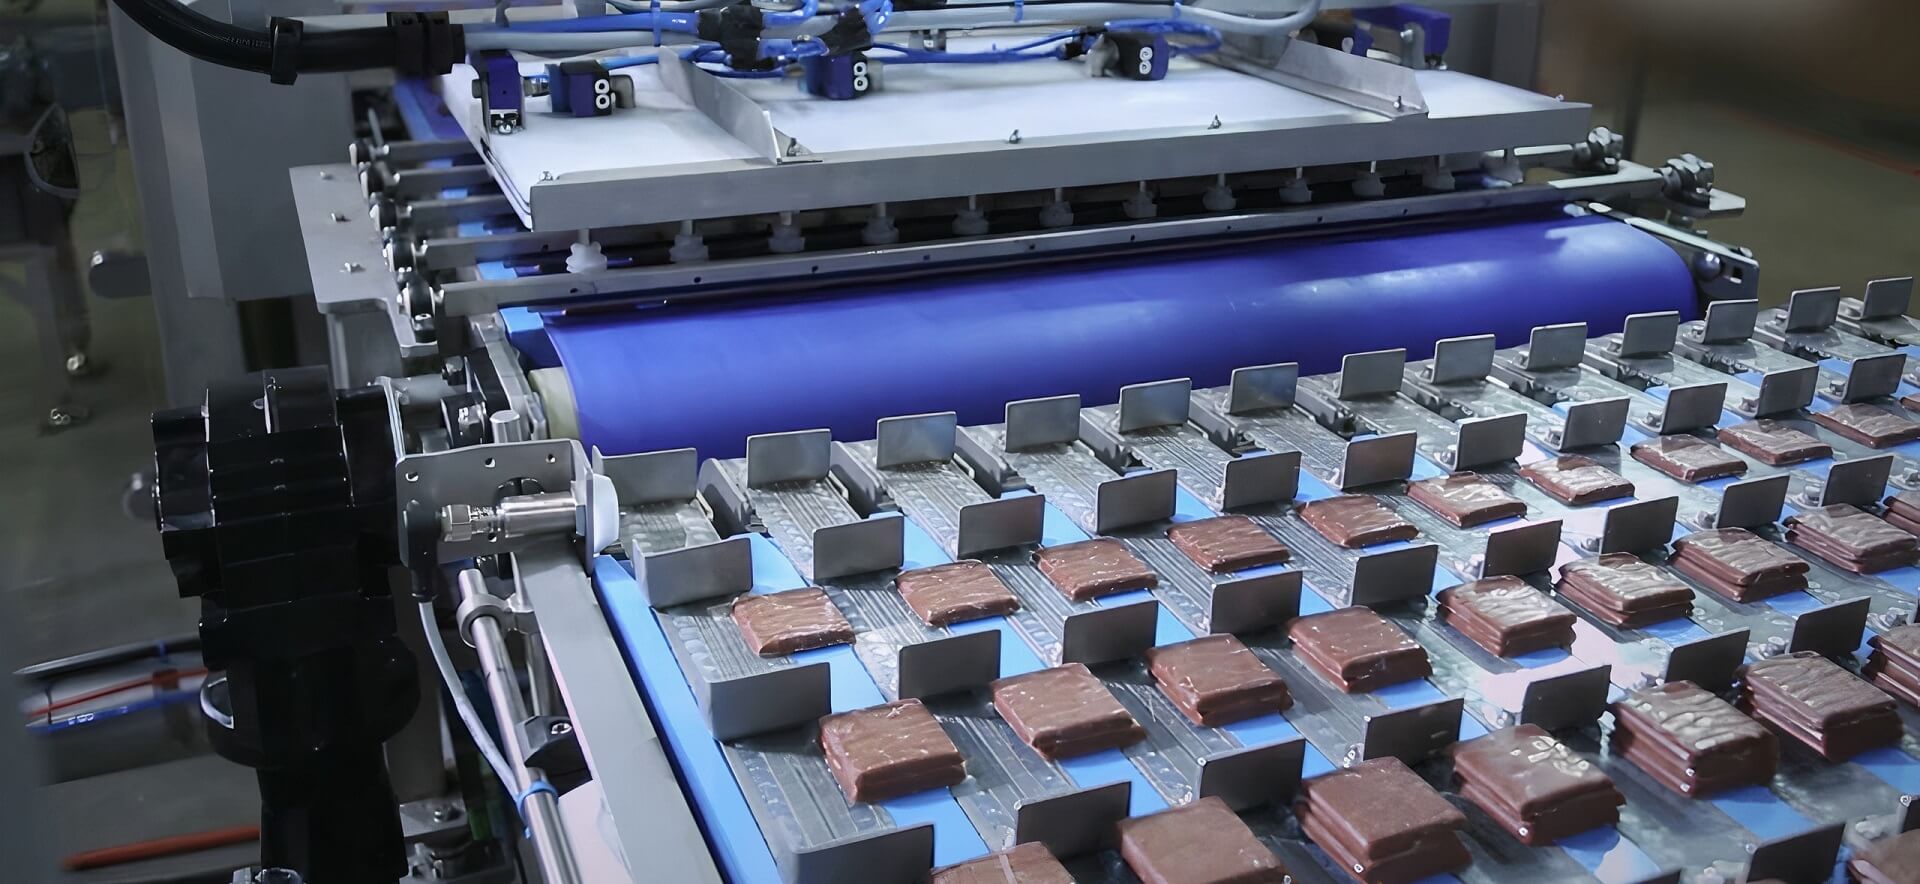 Automation in Food Packaging Industry - Trends and Benefits